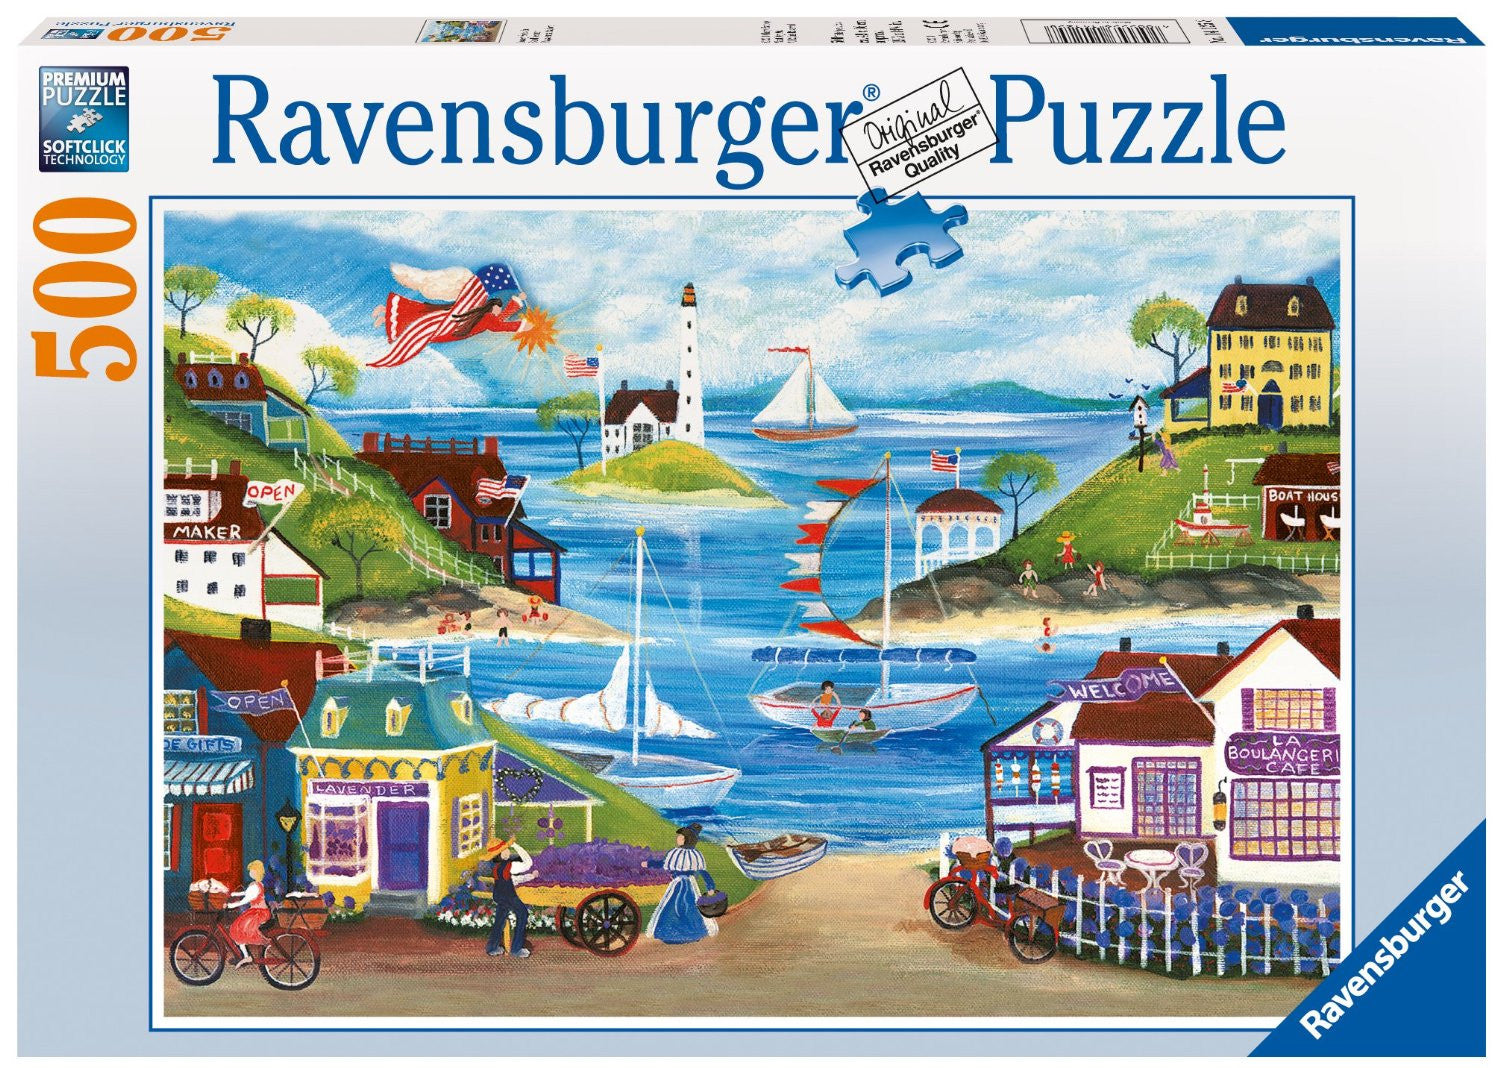 Ravensburger Adult Puzzles 500 pc Puzzles - Lovely Seaside 14125